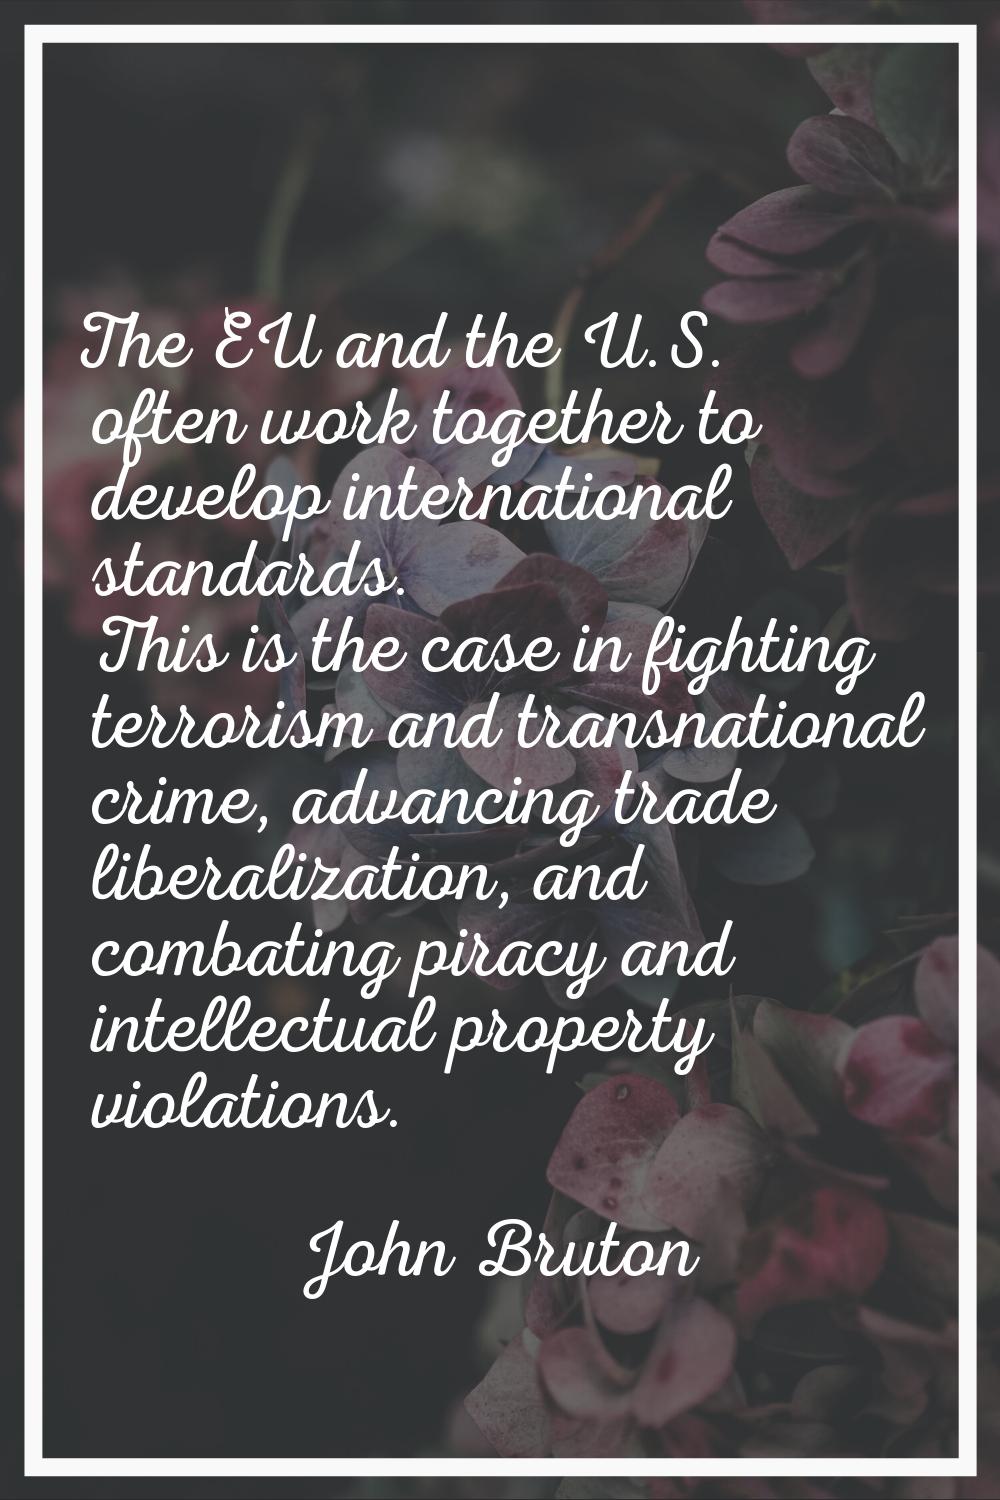 The EU and the U.S. often work together to develop international standards. This is the case in fig